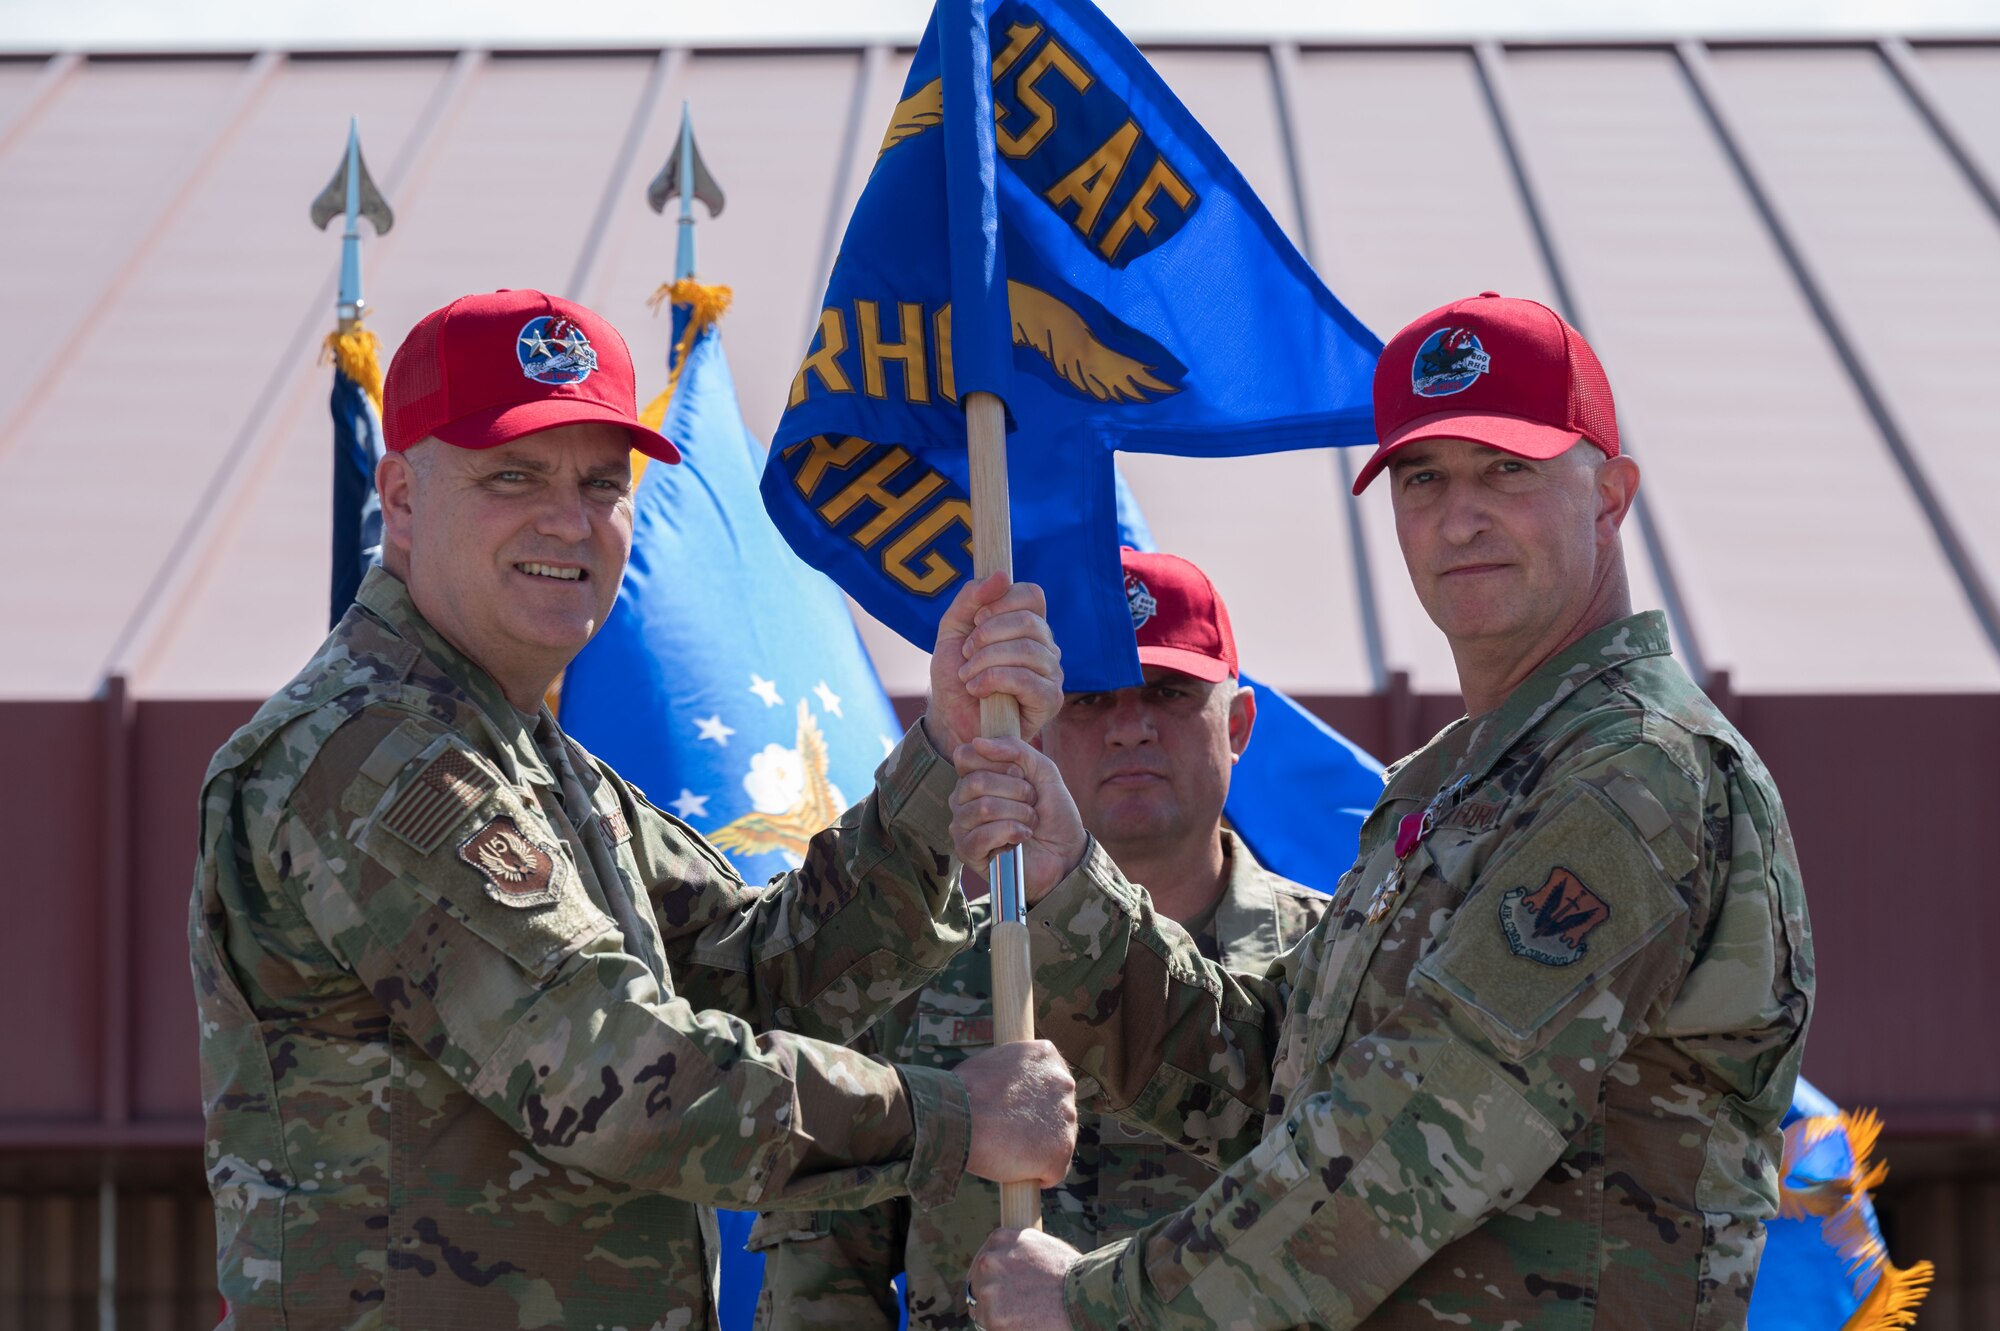 U.S. Air Force Maj. Gen. Michael Koscheski, left, 15th Air Force commander, accepts the 800th Rapid Engineering Deployable Heavy Operations Repair Squadron Engineer RED HORSE Group (RHG) guidon from Col. Matthew Welling, the outgoing RHG commander, during a change of command ceremony at Nellis Air Force Base, Nevada, May 16, 2023.